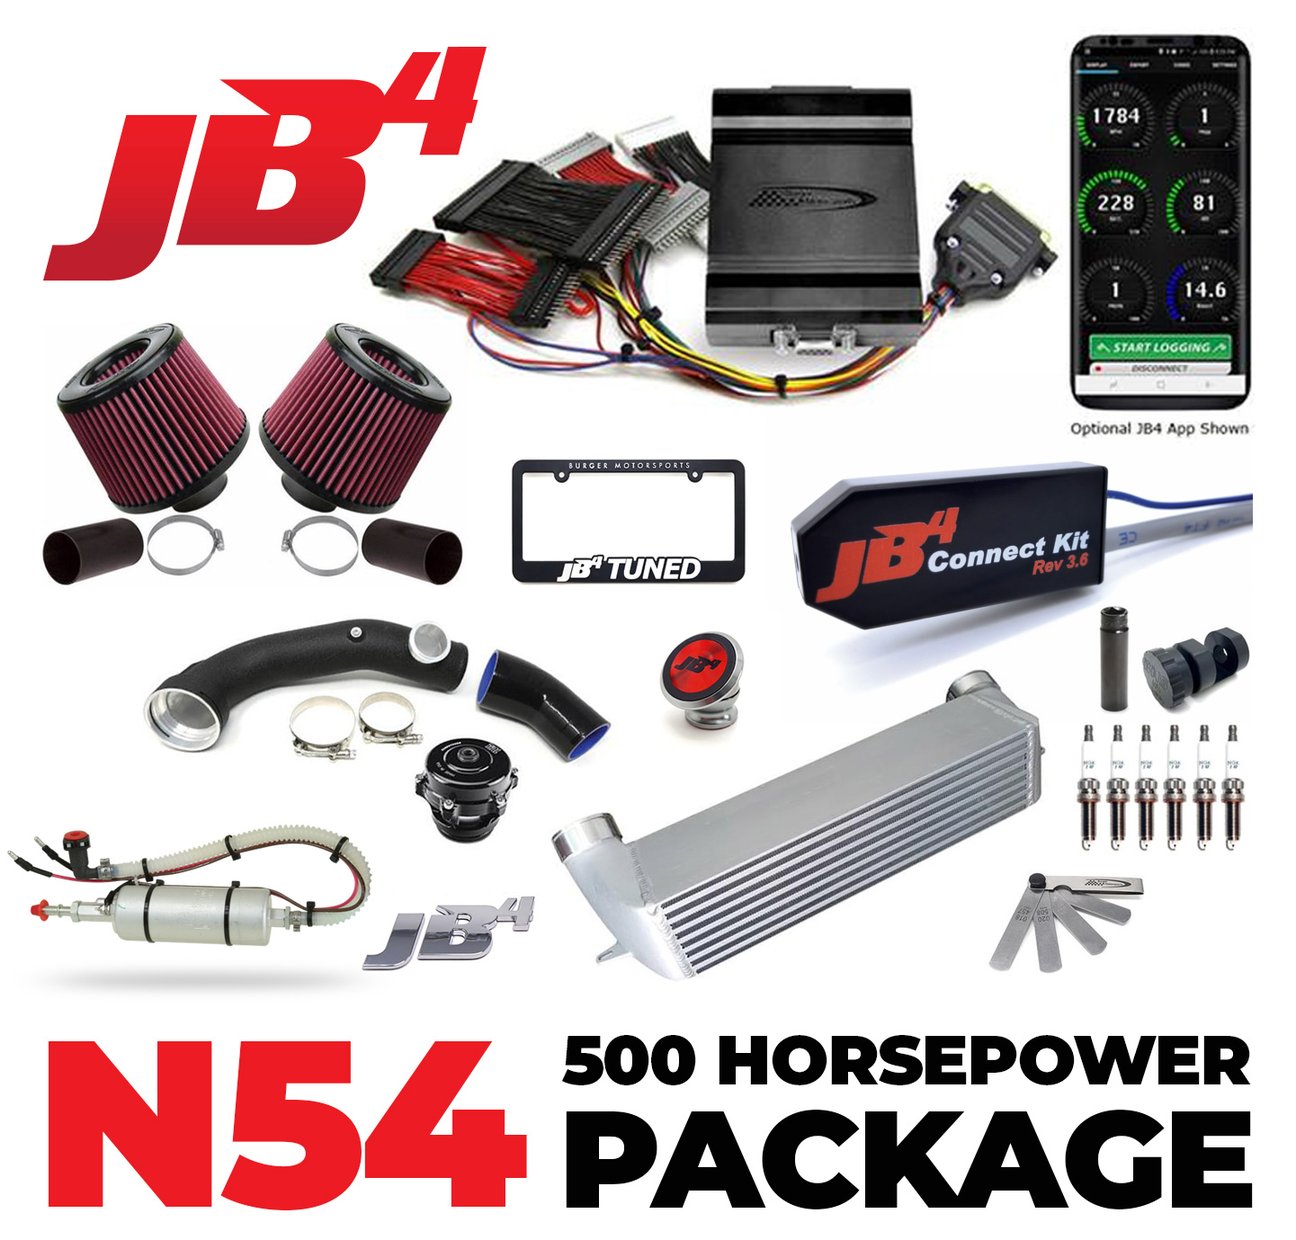 500 Horsepower Package for N54 BMW